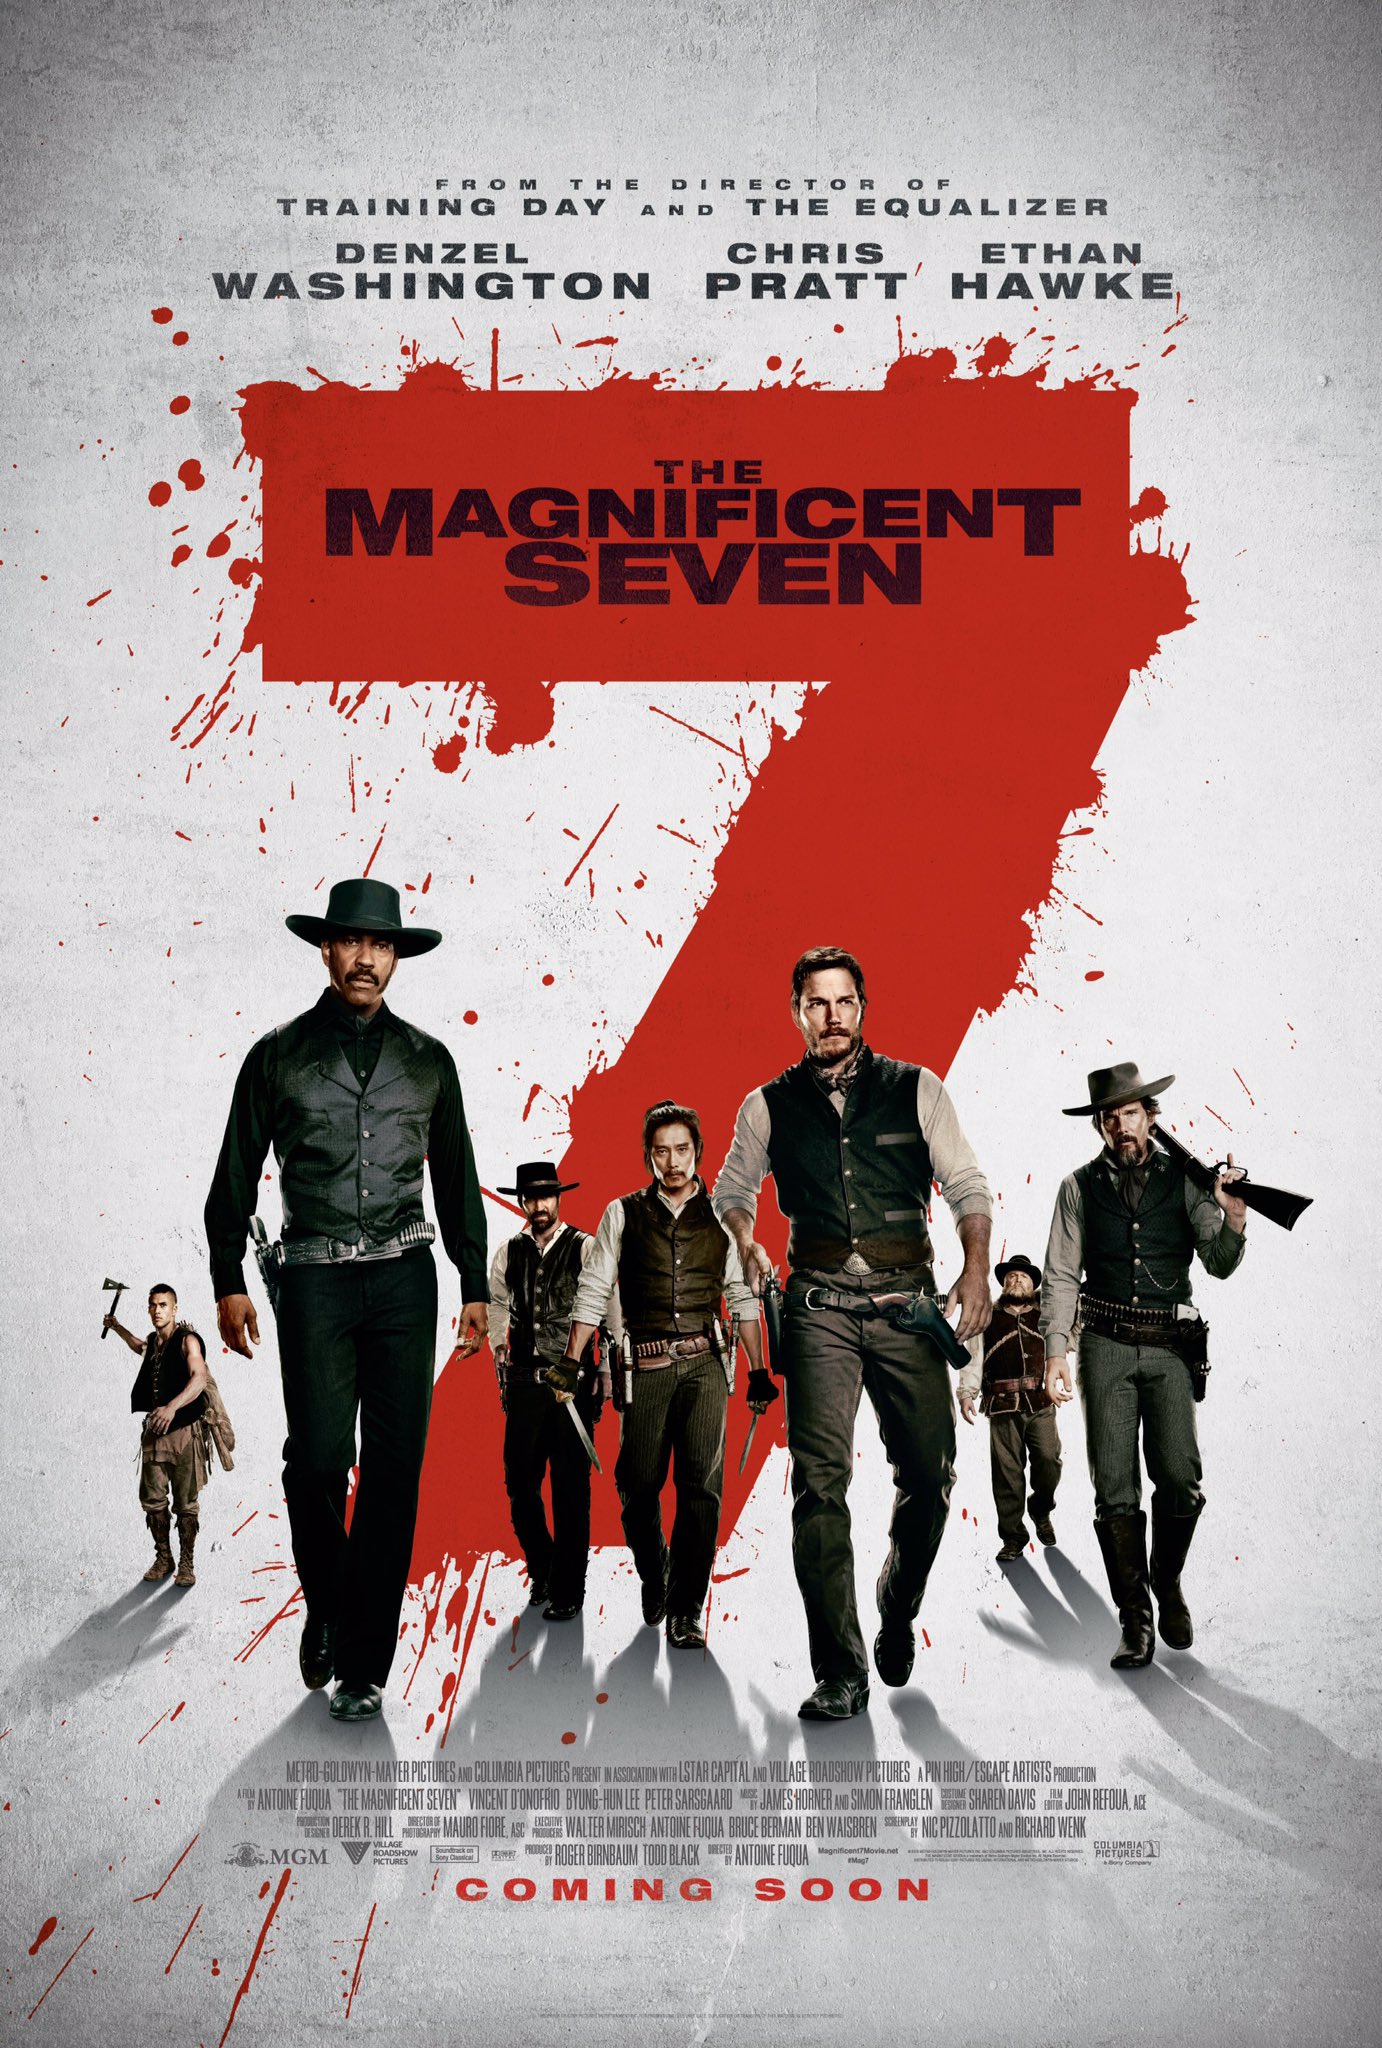 The Magnificent Seven, Amy Robsart Hall, Syderstone PE31 8SD | A remake of the classic western, starring Denzel Washington and Chris Pratt | Film